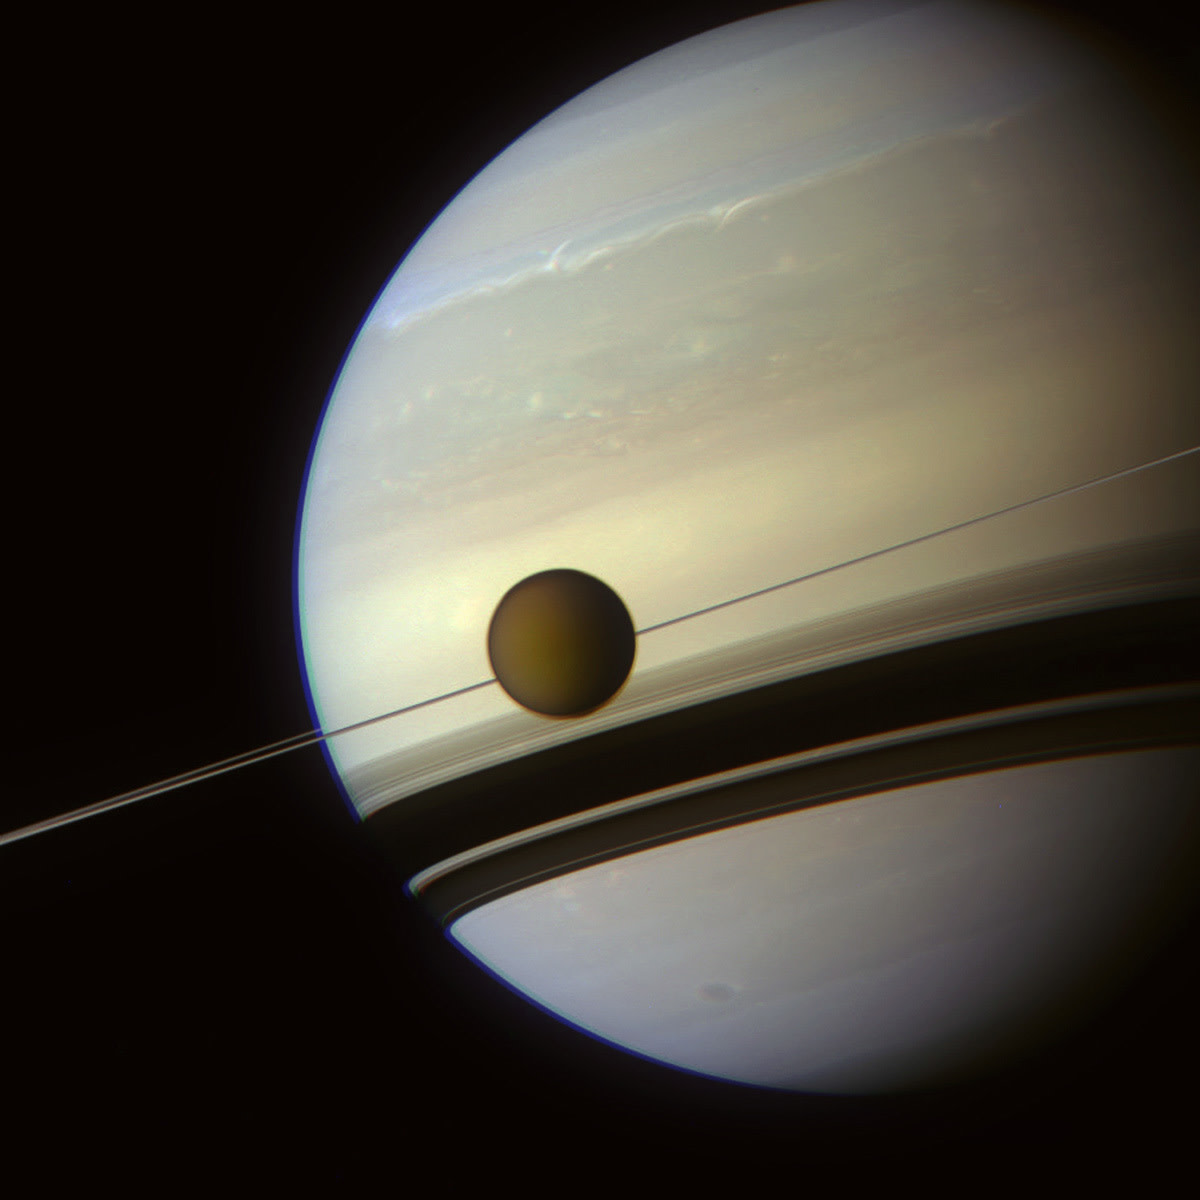 Titan lines up beautifully with Saturn's rings.